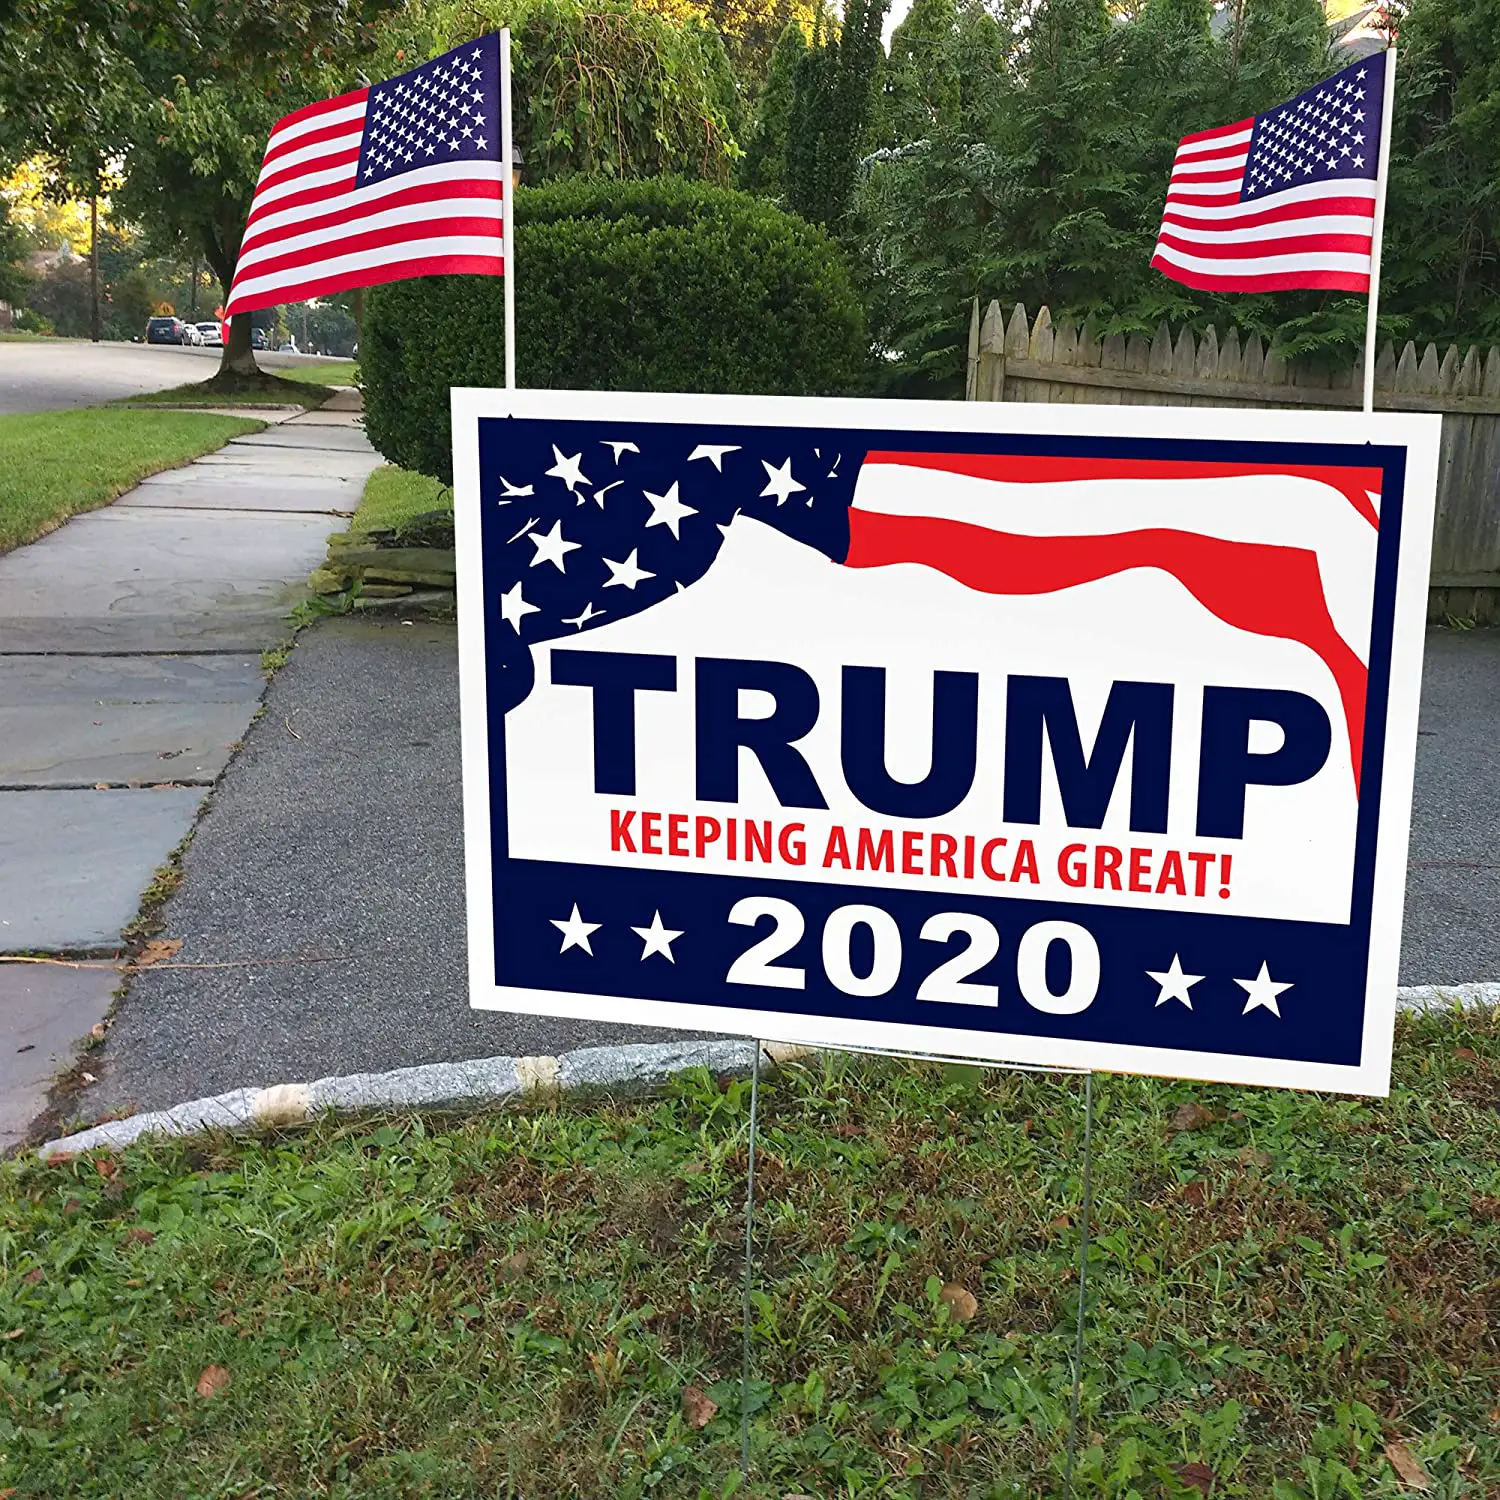 Amazon.com : ITC Donald Trump for President 2020 Yard Signs with H ...